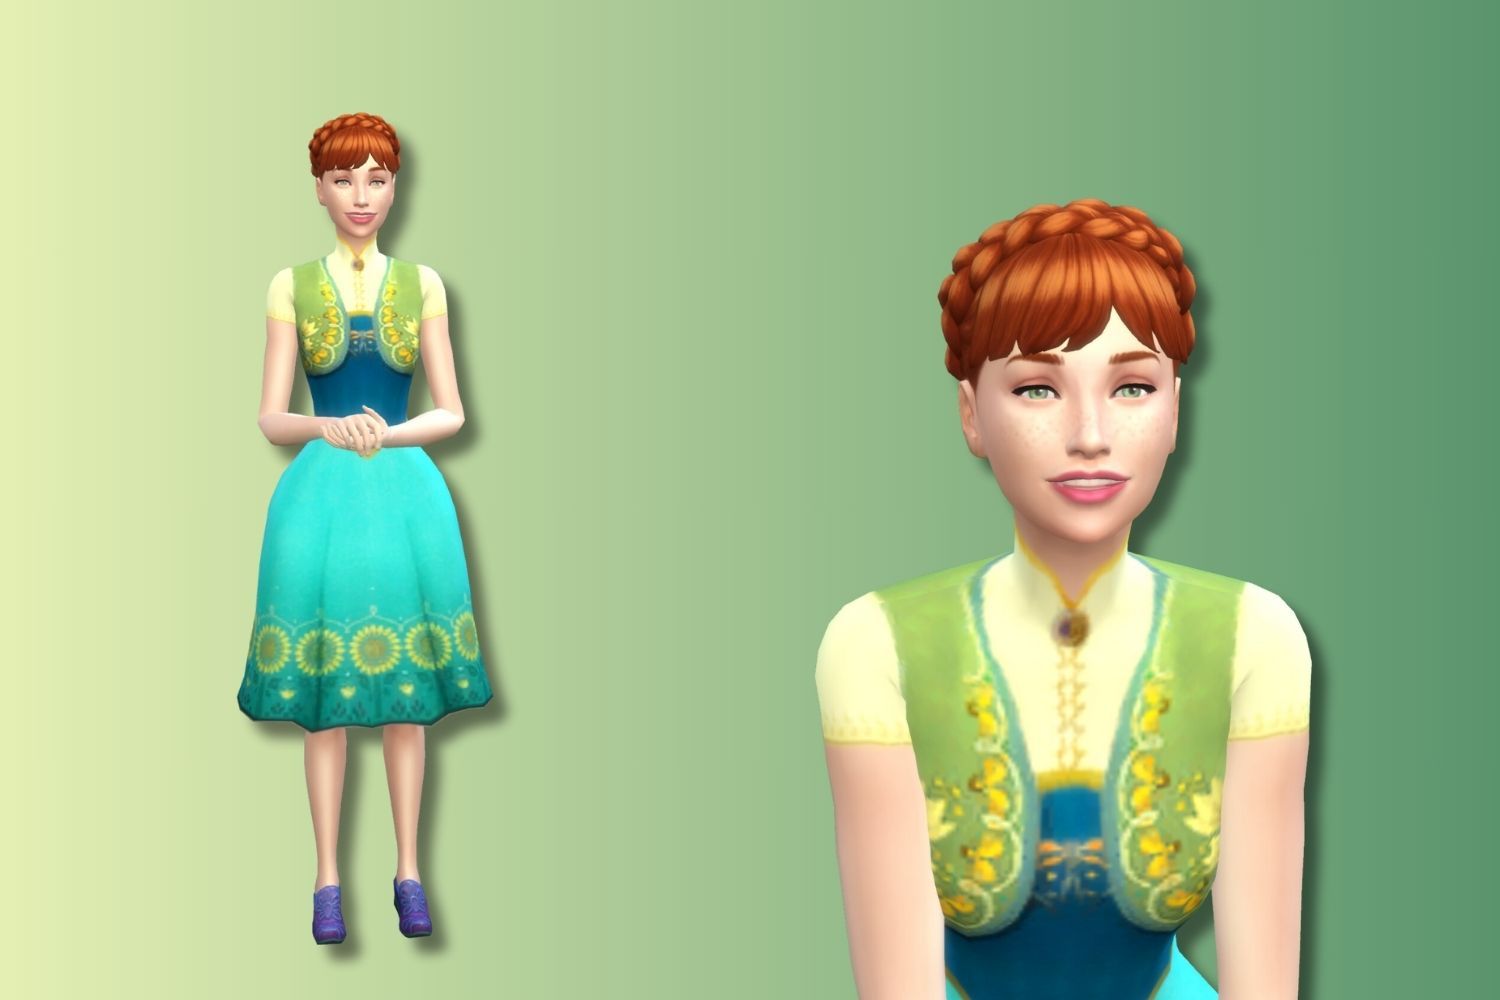 A Sim resembling Frozen's Anna is shown against a green background.